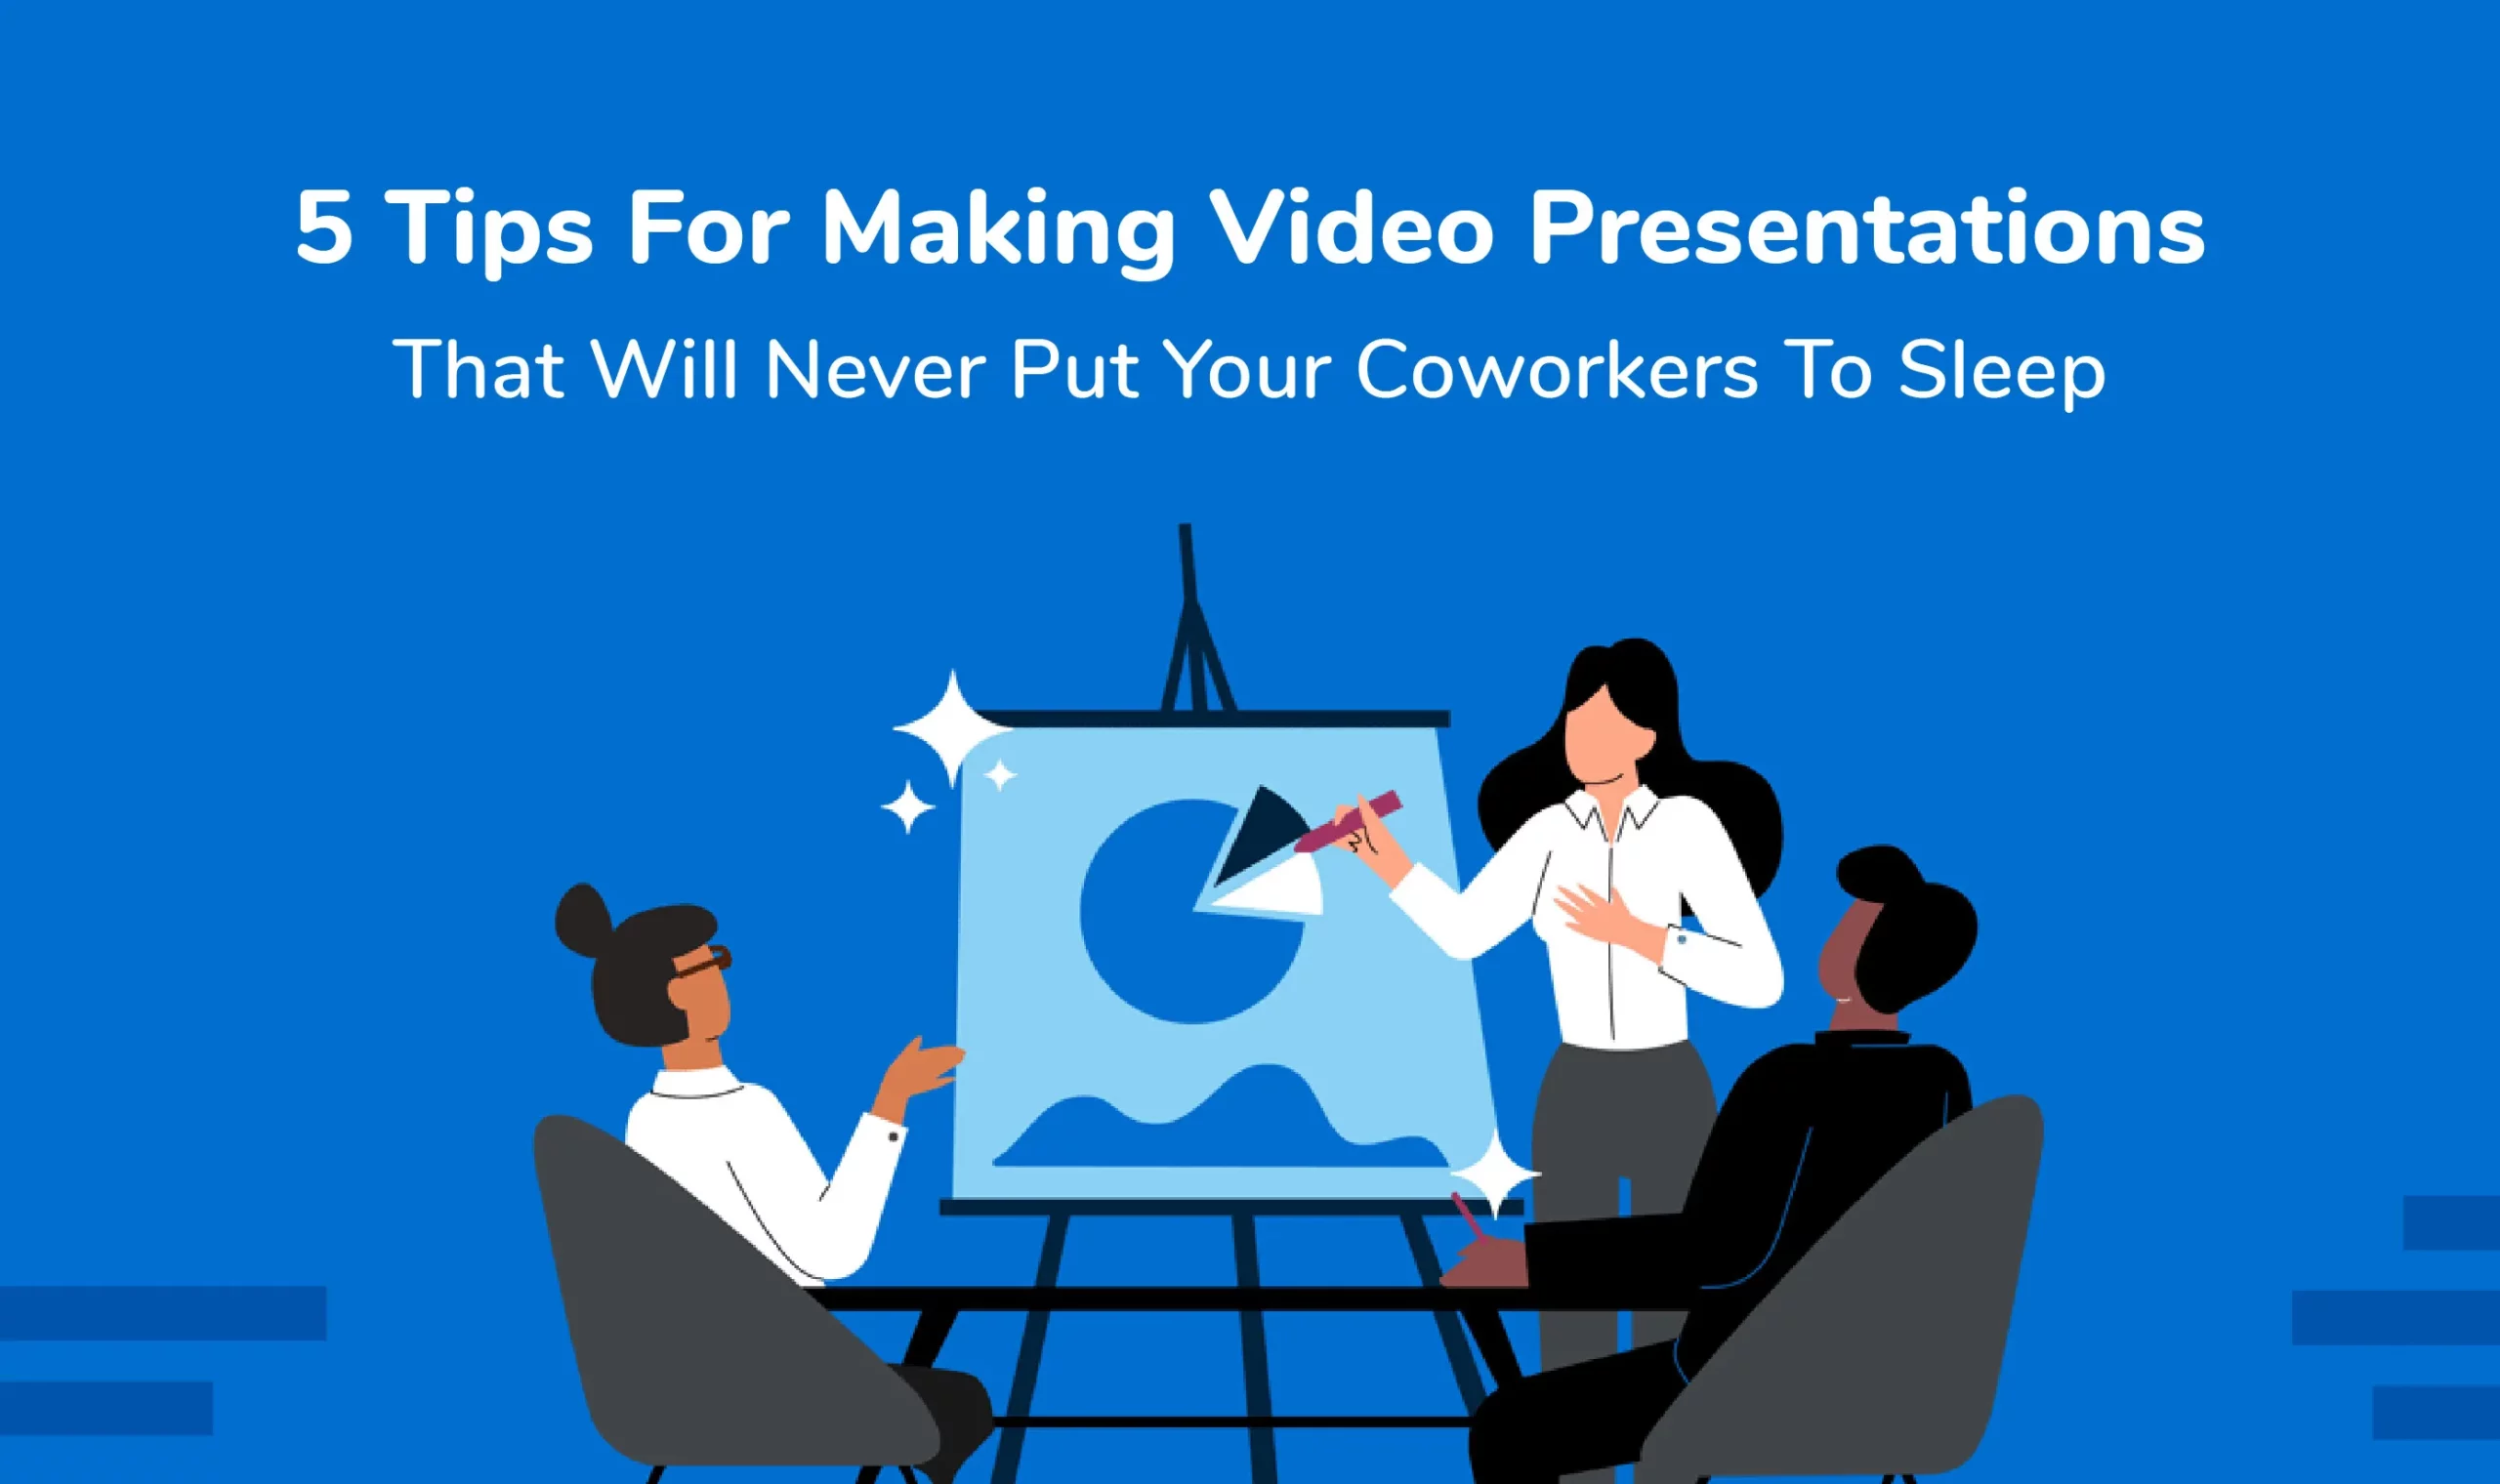 5 Tips For Making Video Presentations That Will Never Put Your Coworkers To Sleep